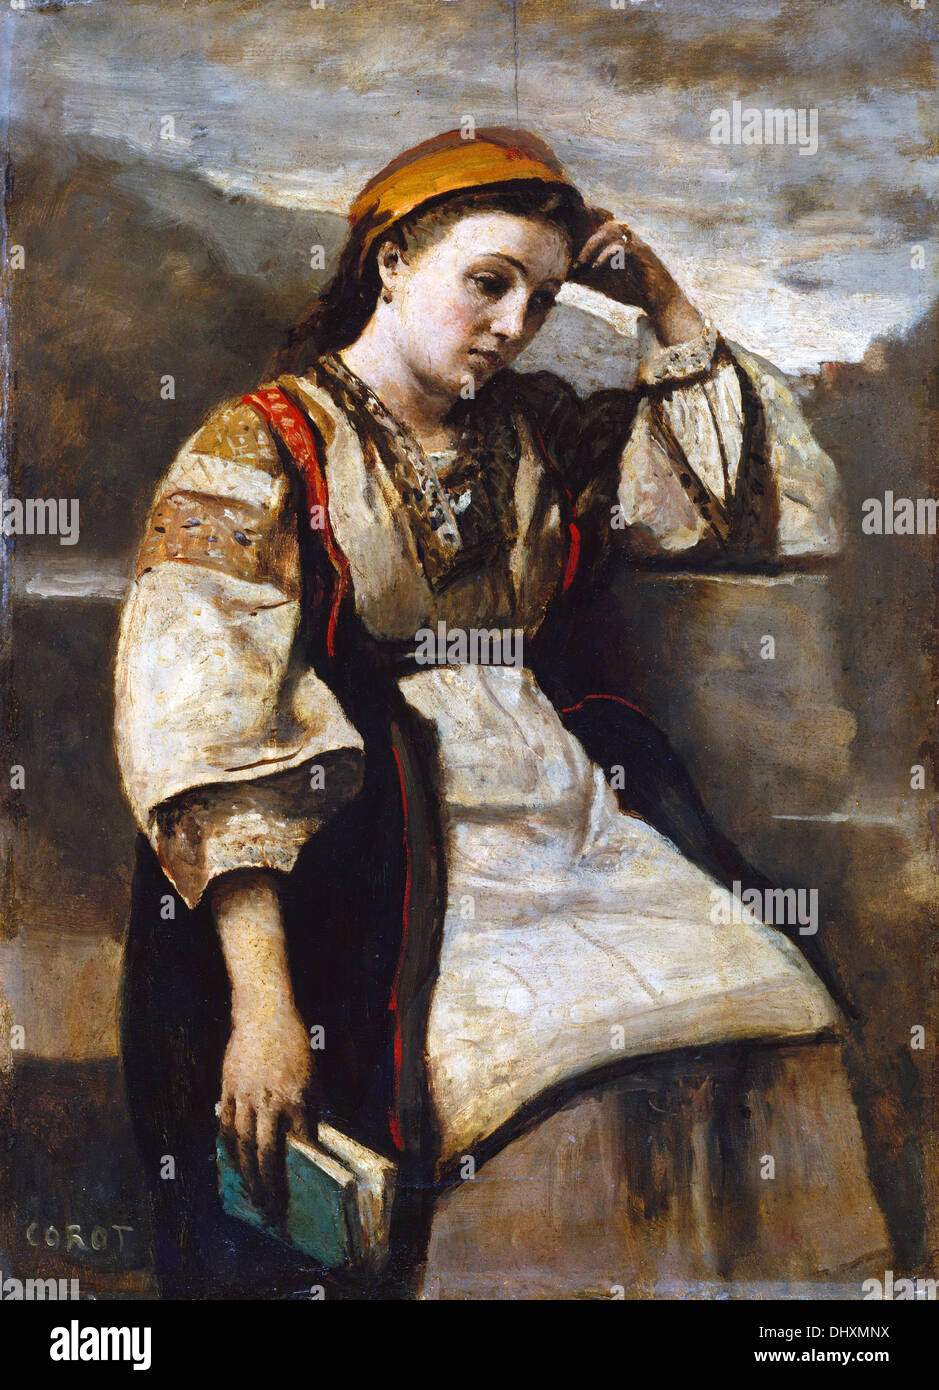 Reverie - by Camille Corot, 1865 Stock Photo